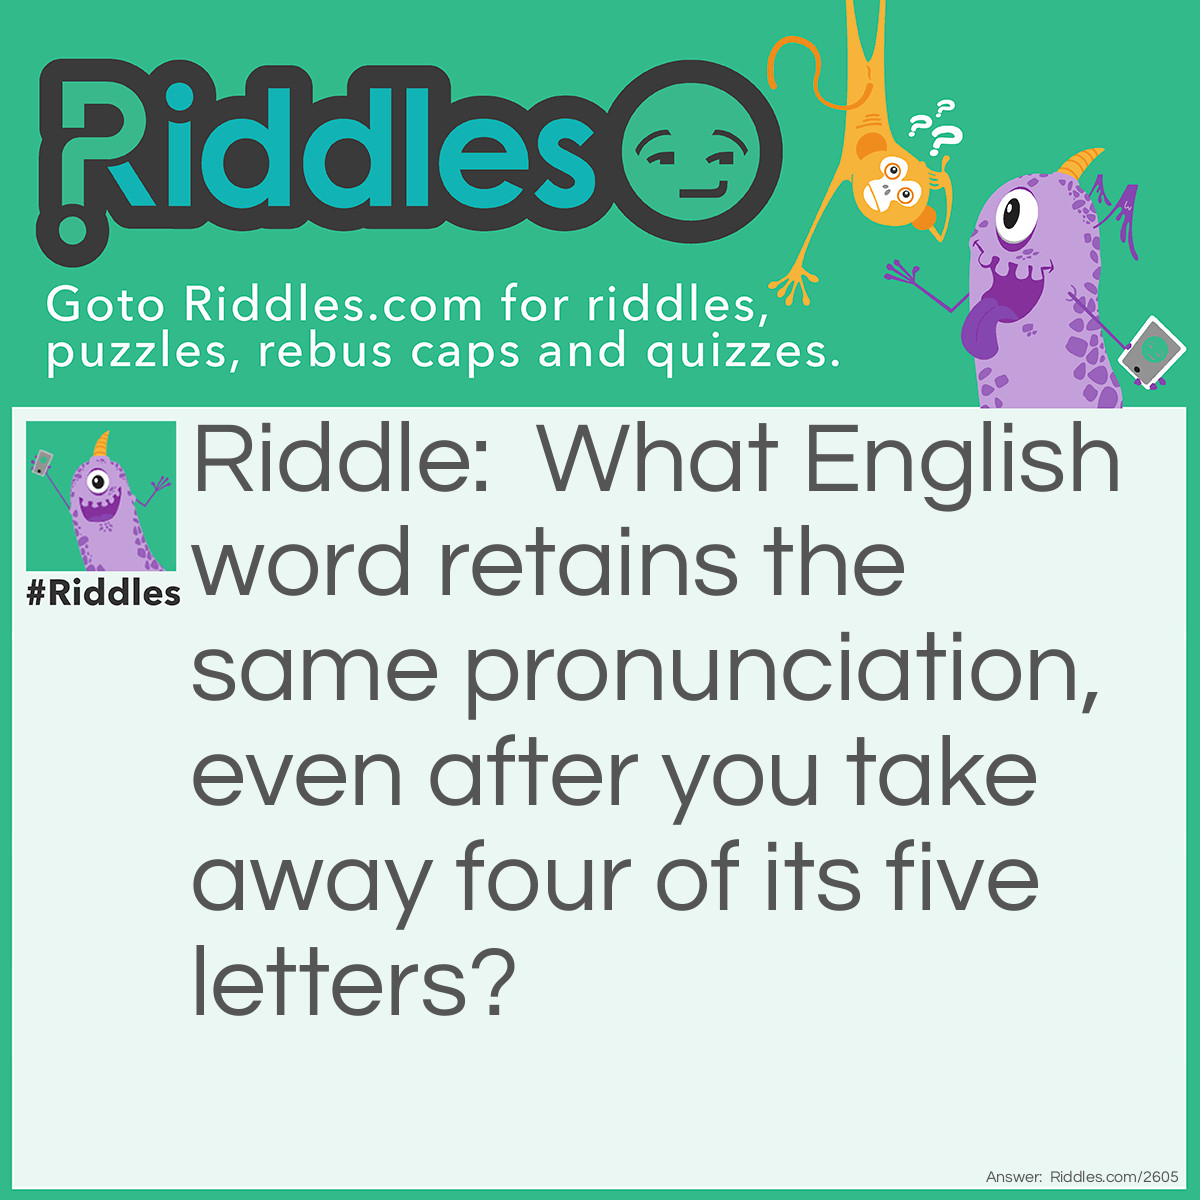 Riddle: What English word retains the same pronunciation, even after you take away four of its five letters? Answer: Queue.